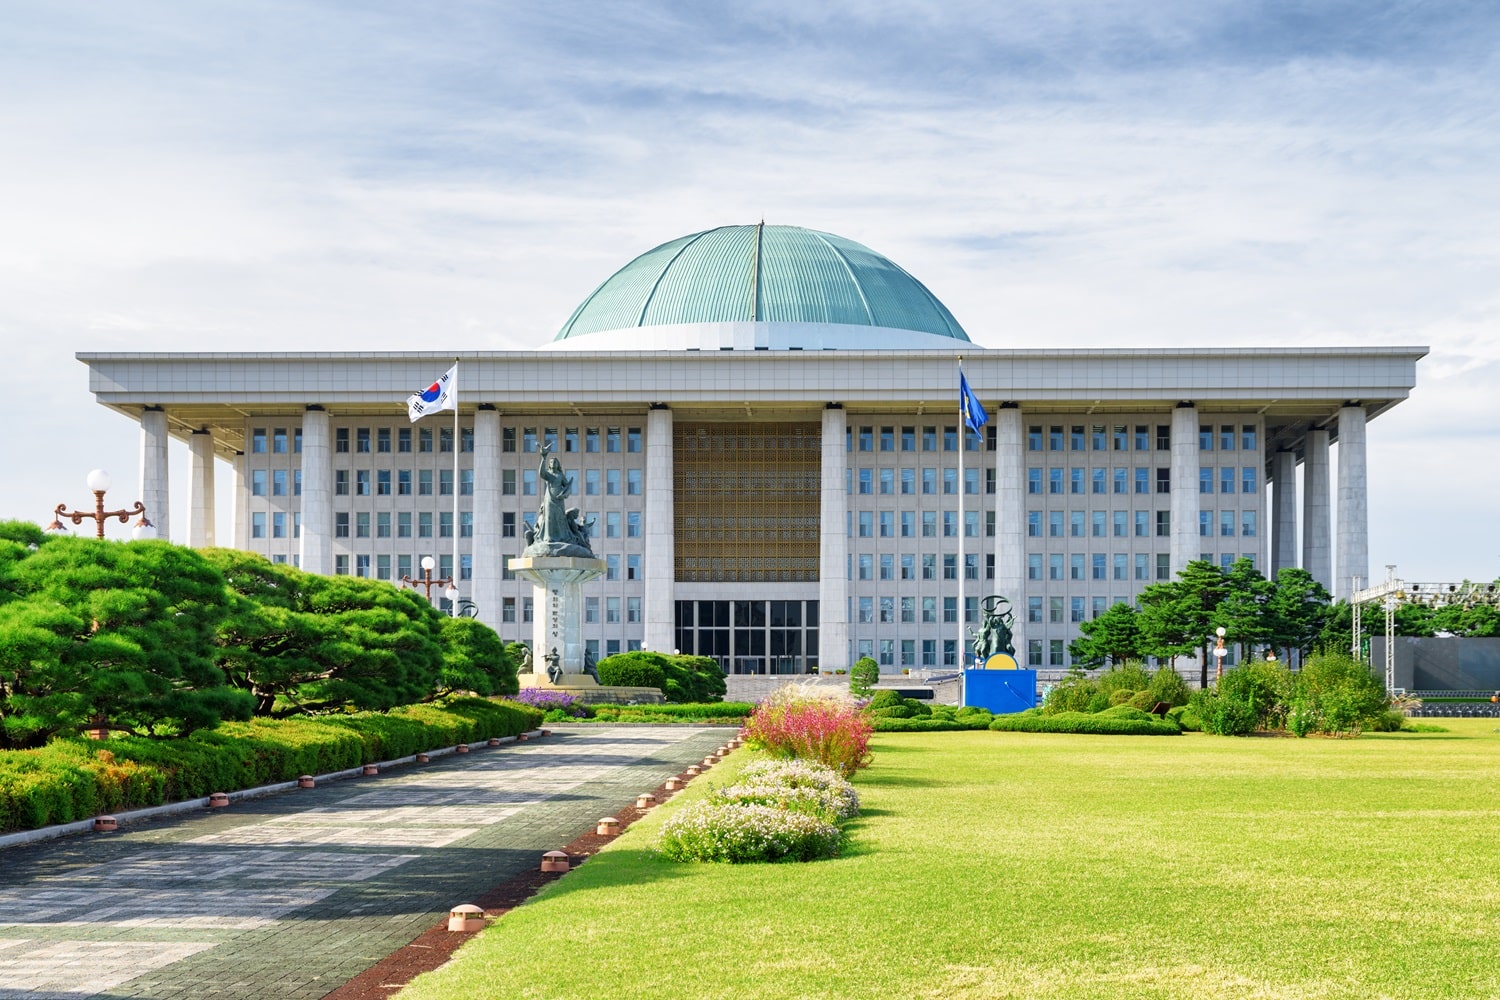 The National Assembly, in Seoul, South Korea.